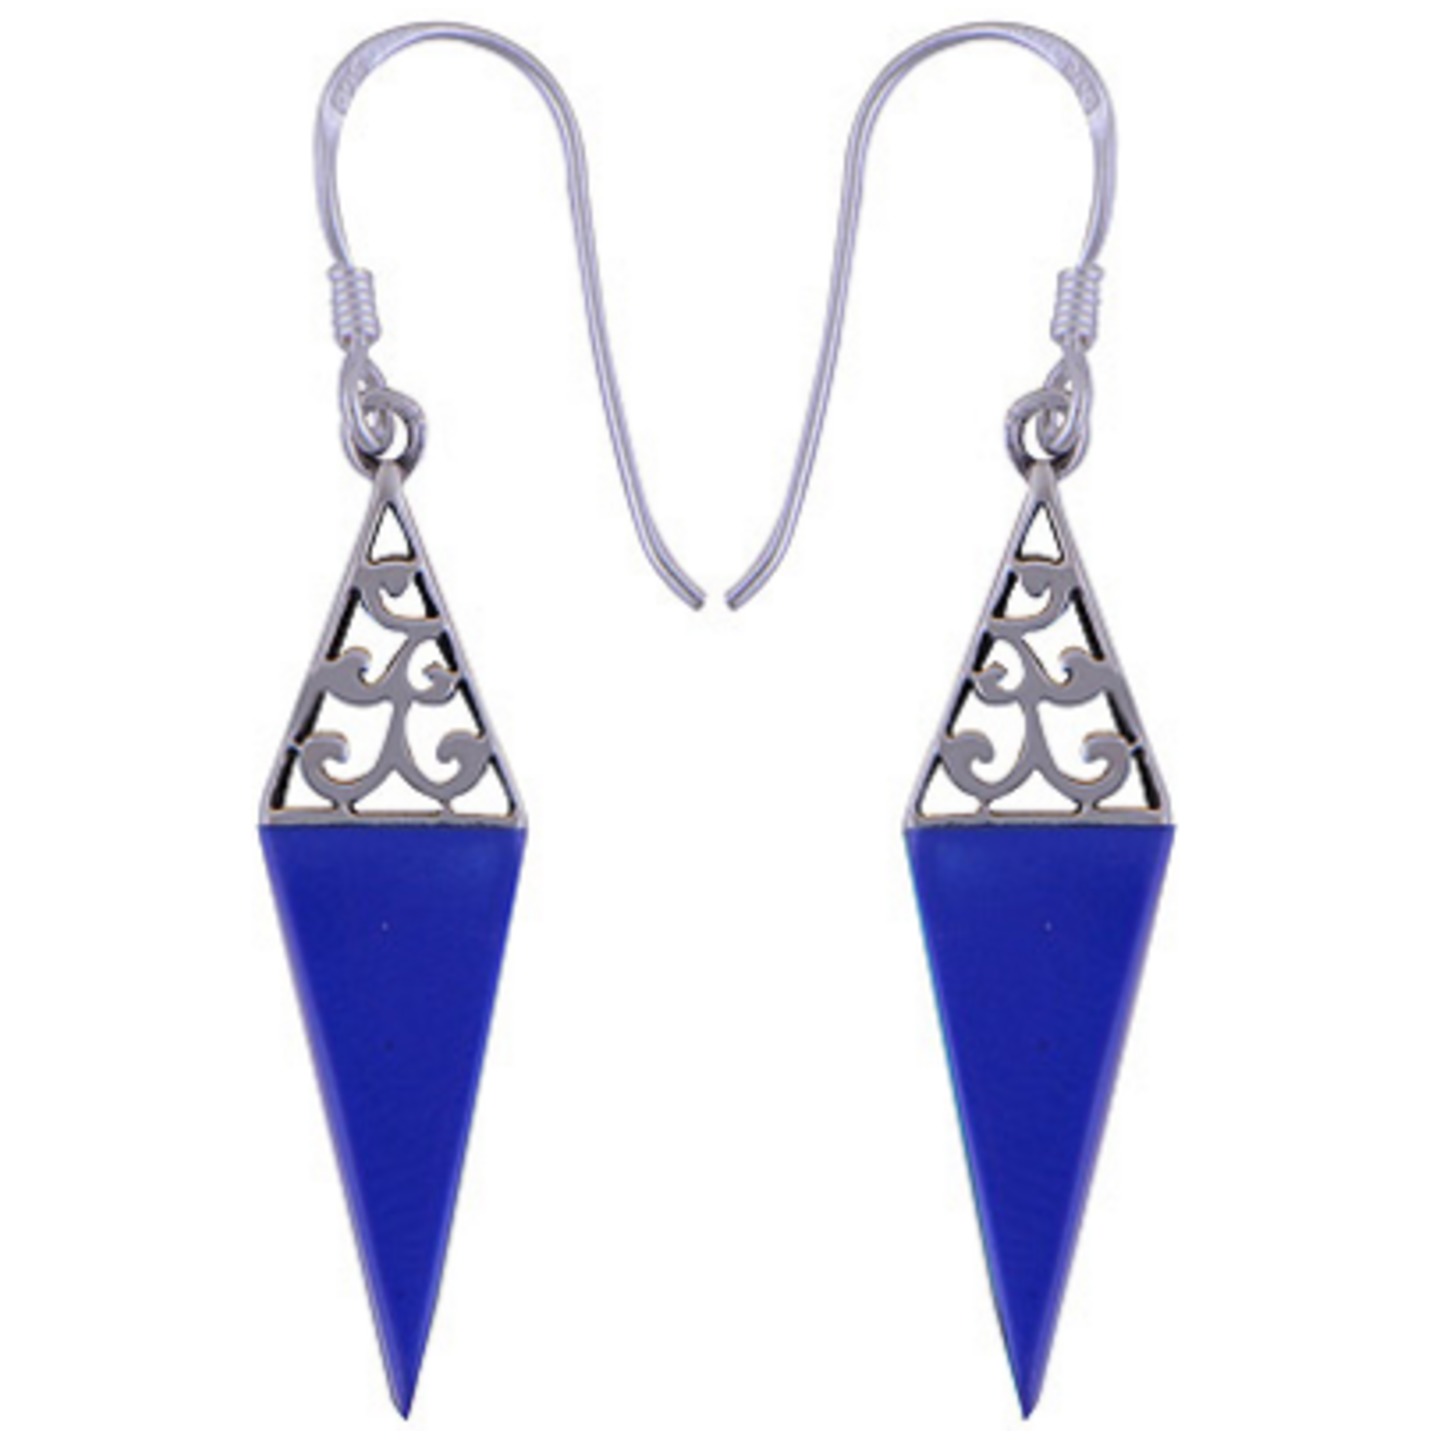 The Midnight Spike Silver Earring